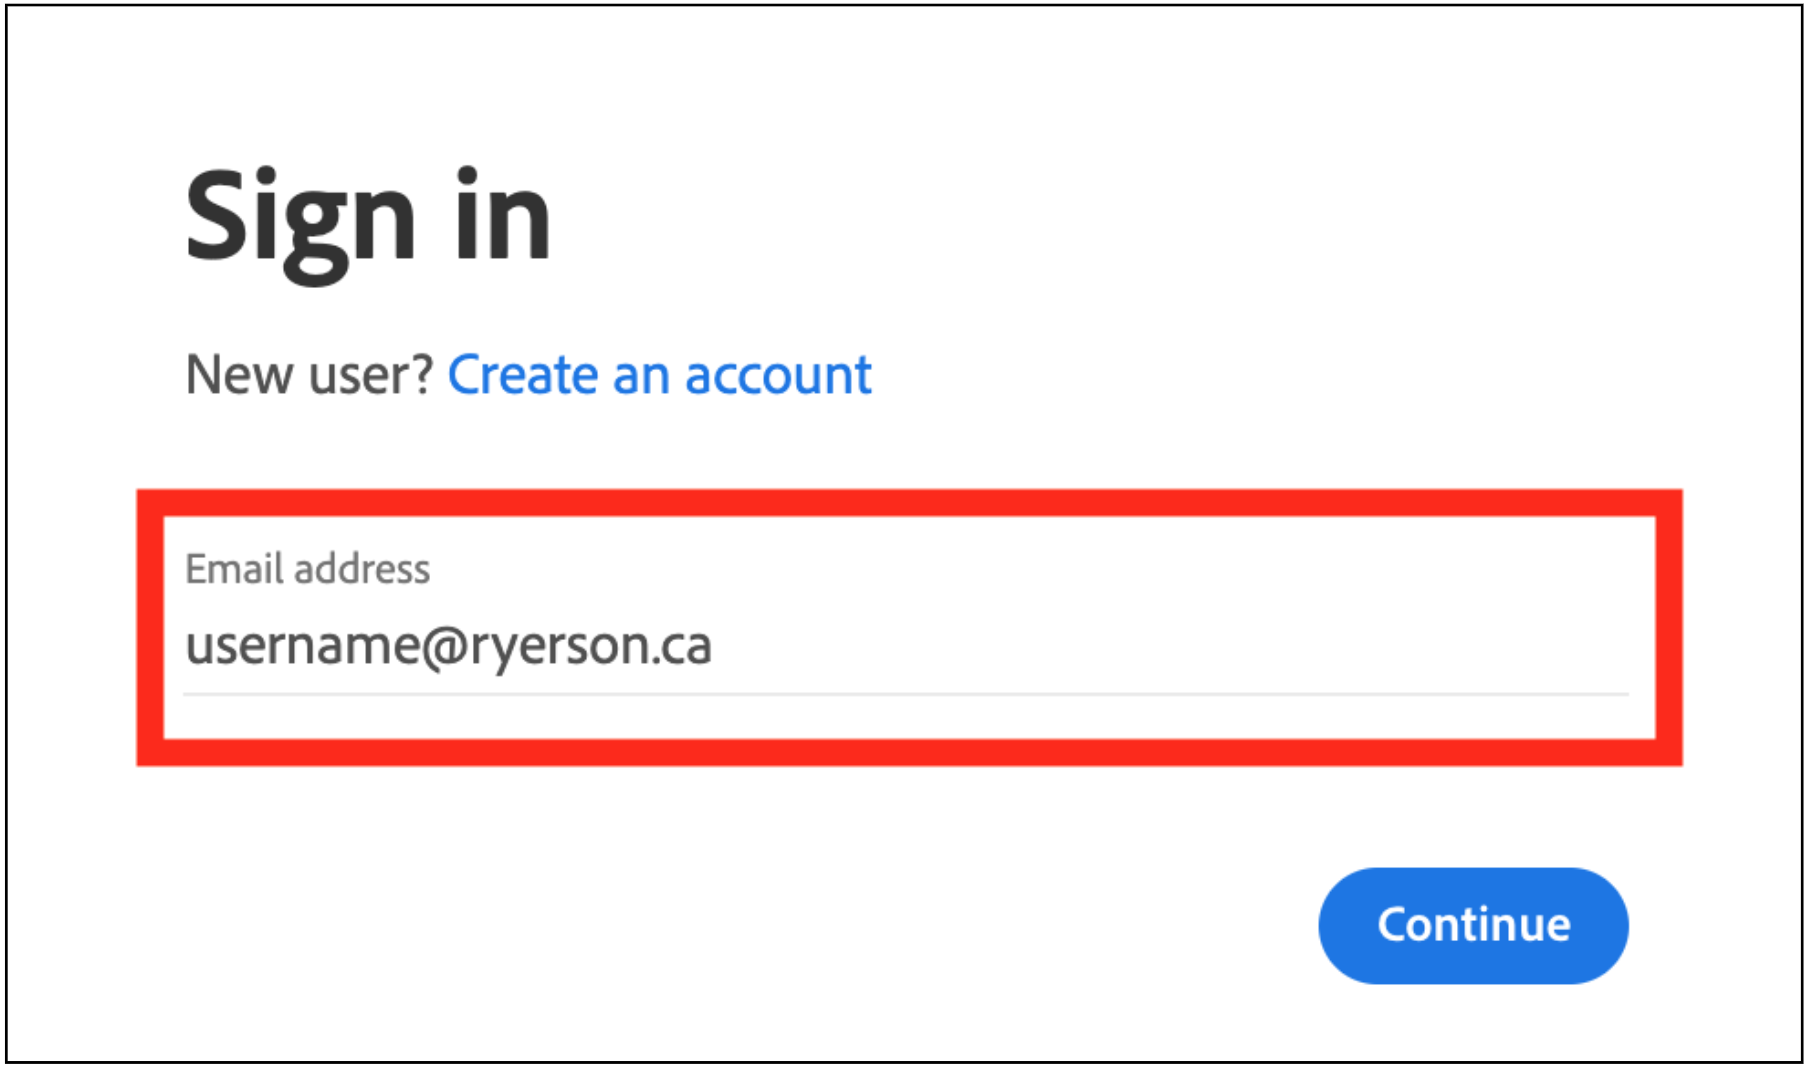 The Adobe 'sign in' screen displays the email address field and a blue 'continue' button.  